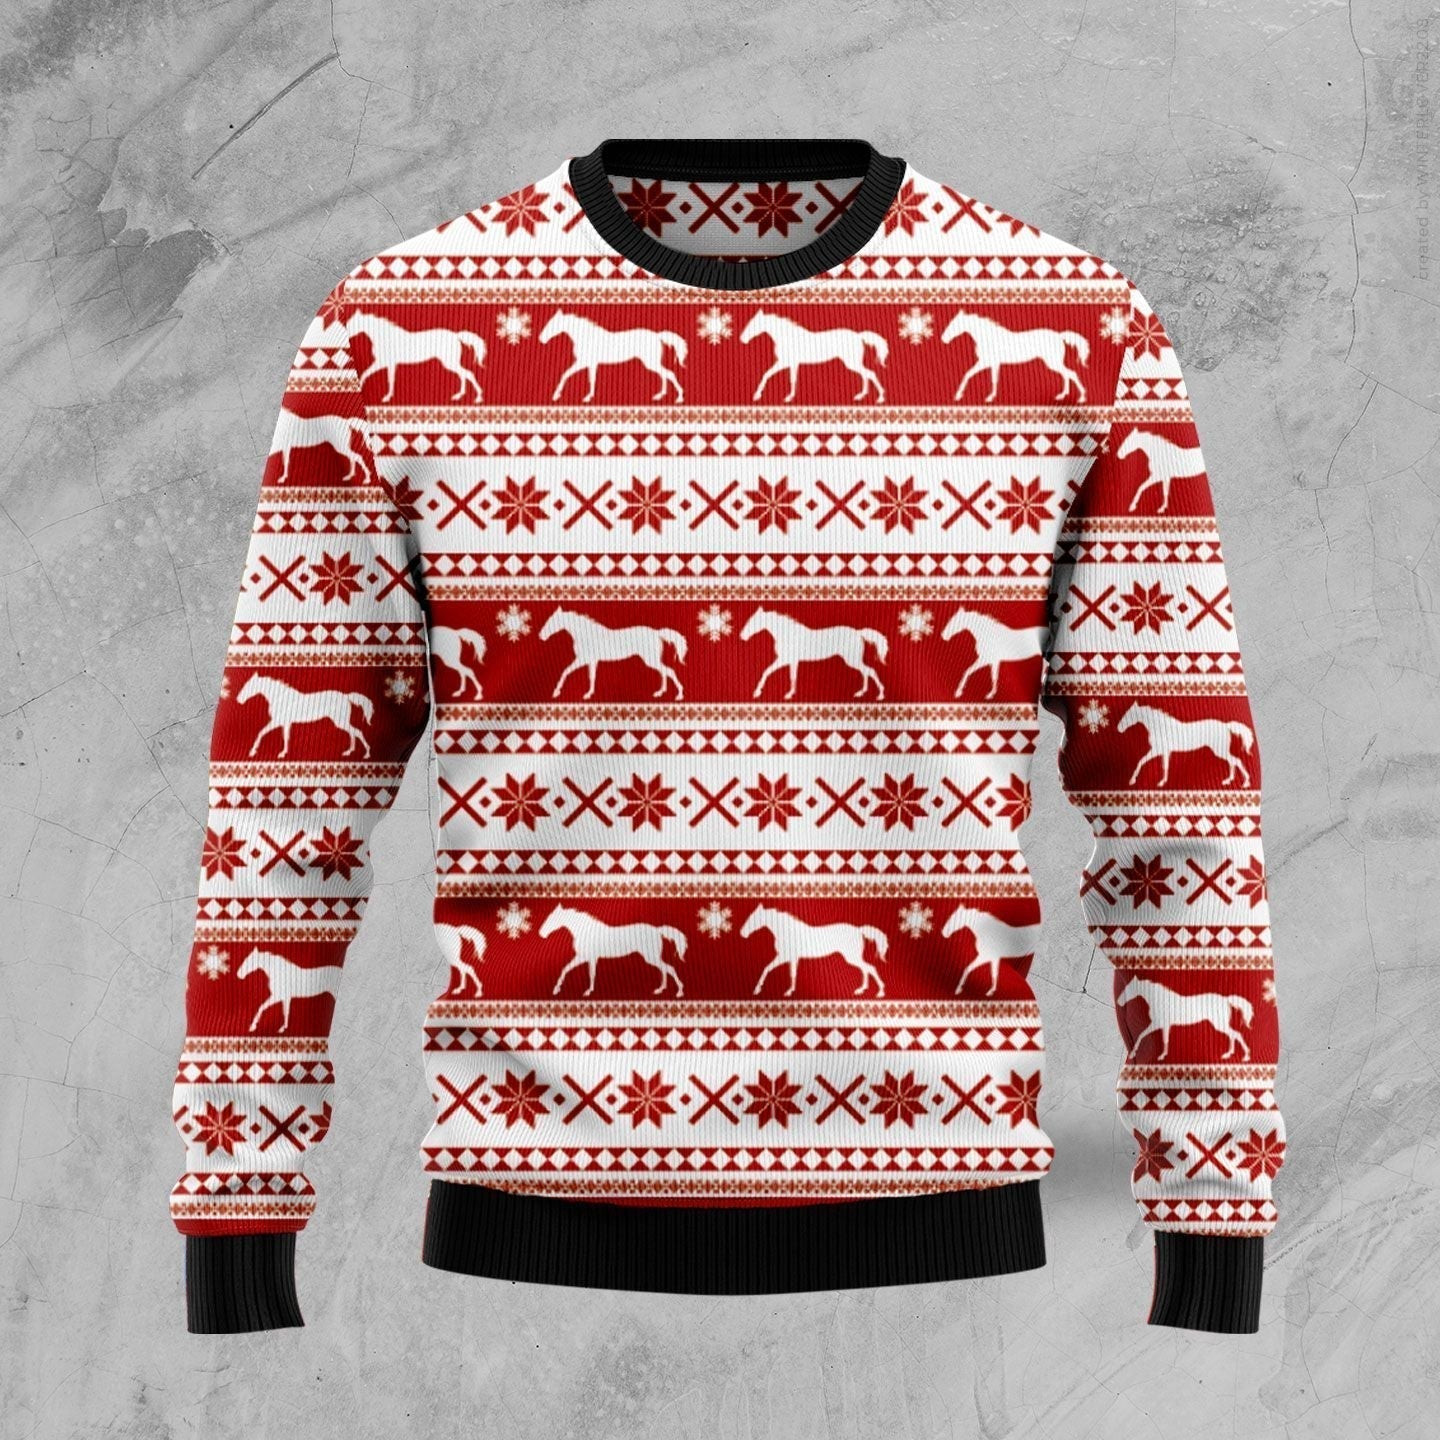 Amazing Horse Ugly Christmas Sweater, Ugly Sweater For Men Women, Holiday Sweater